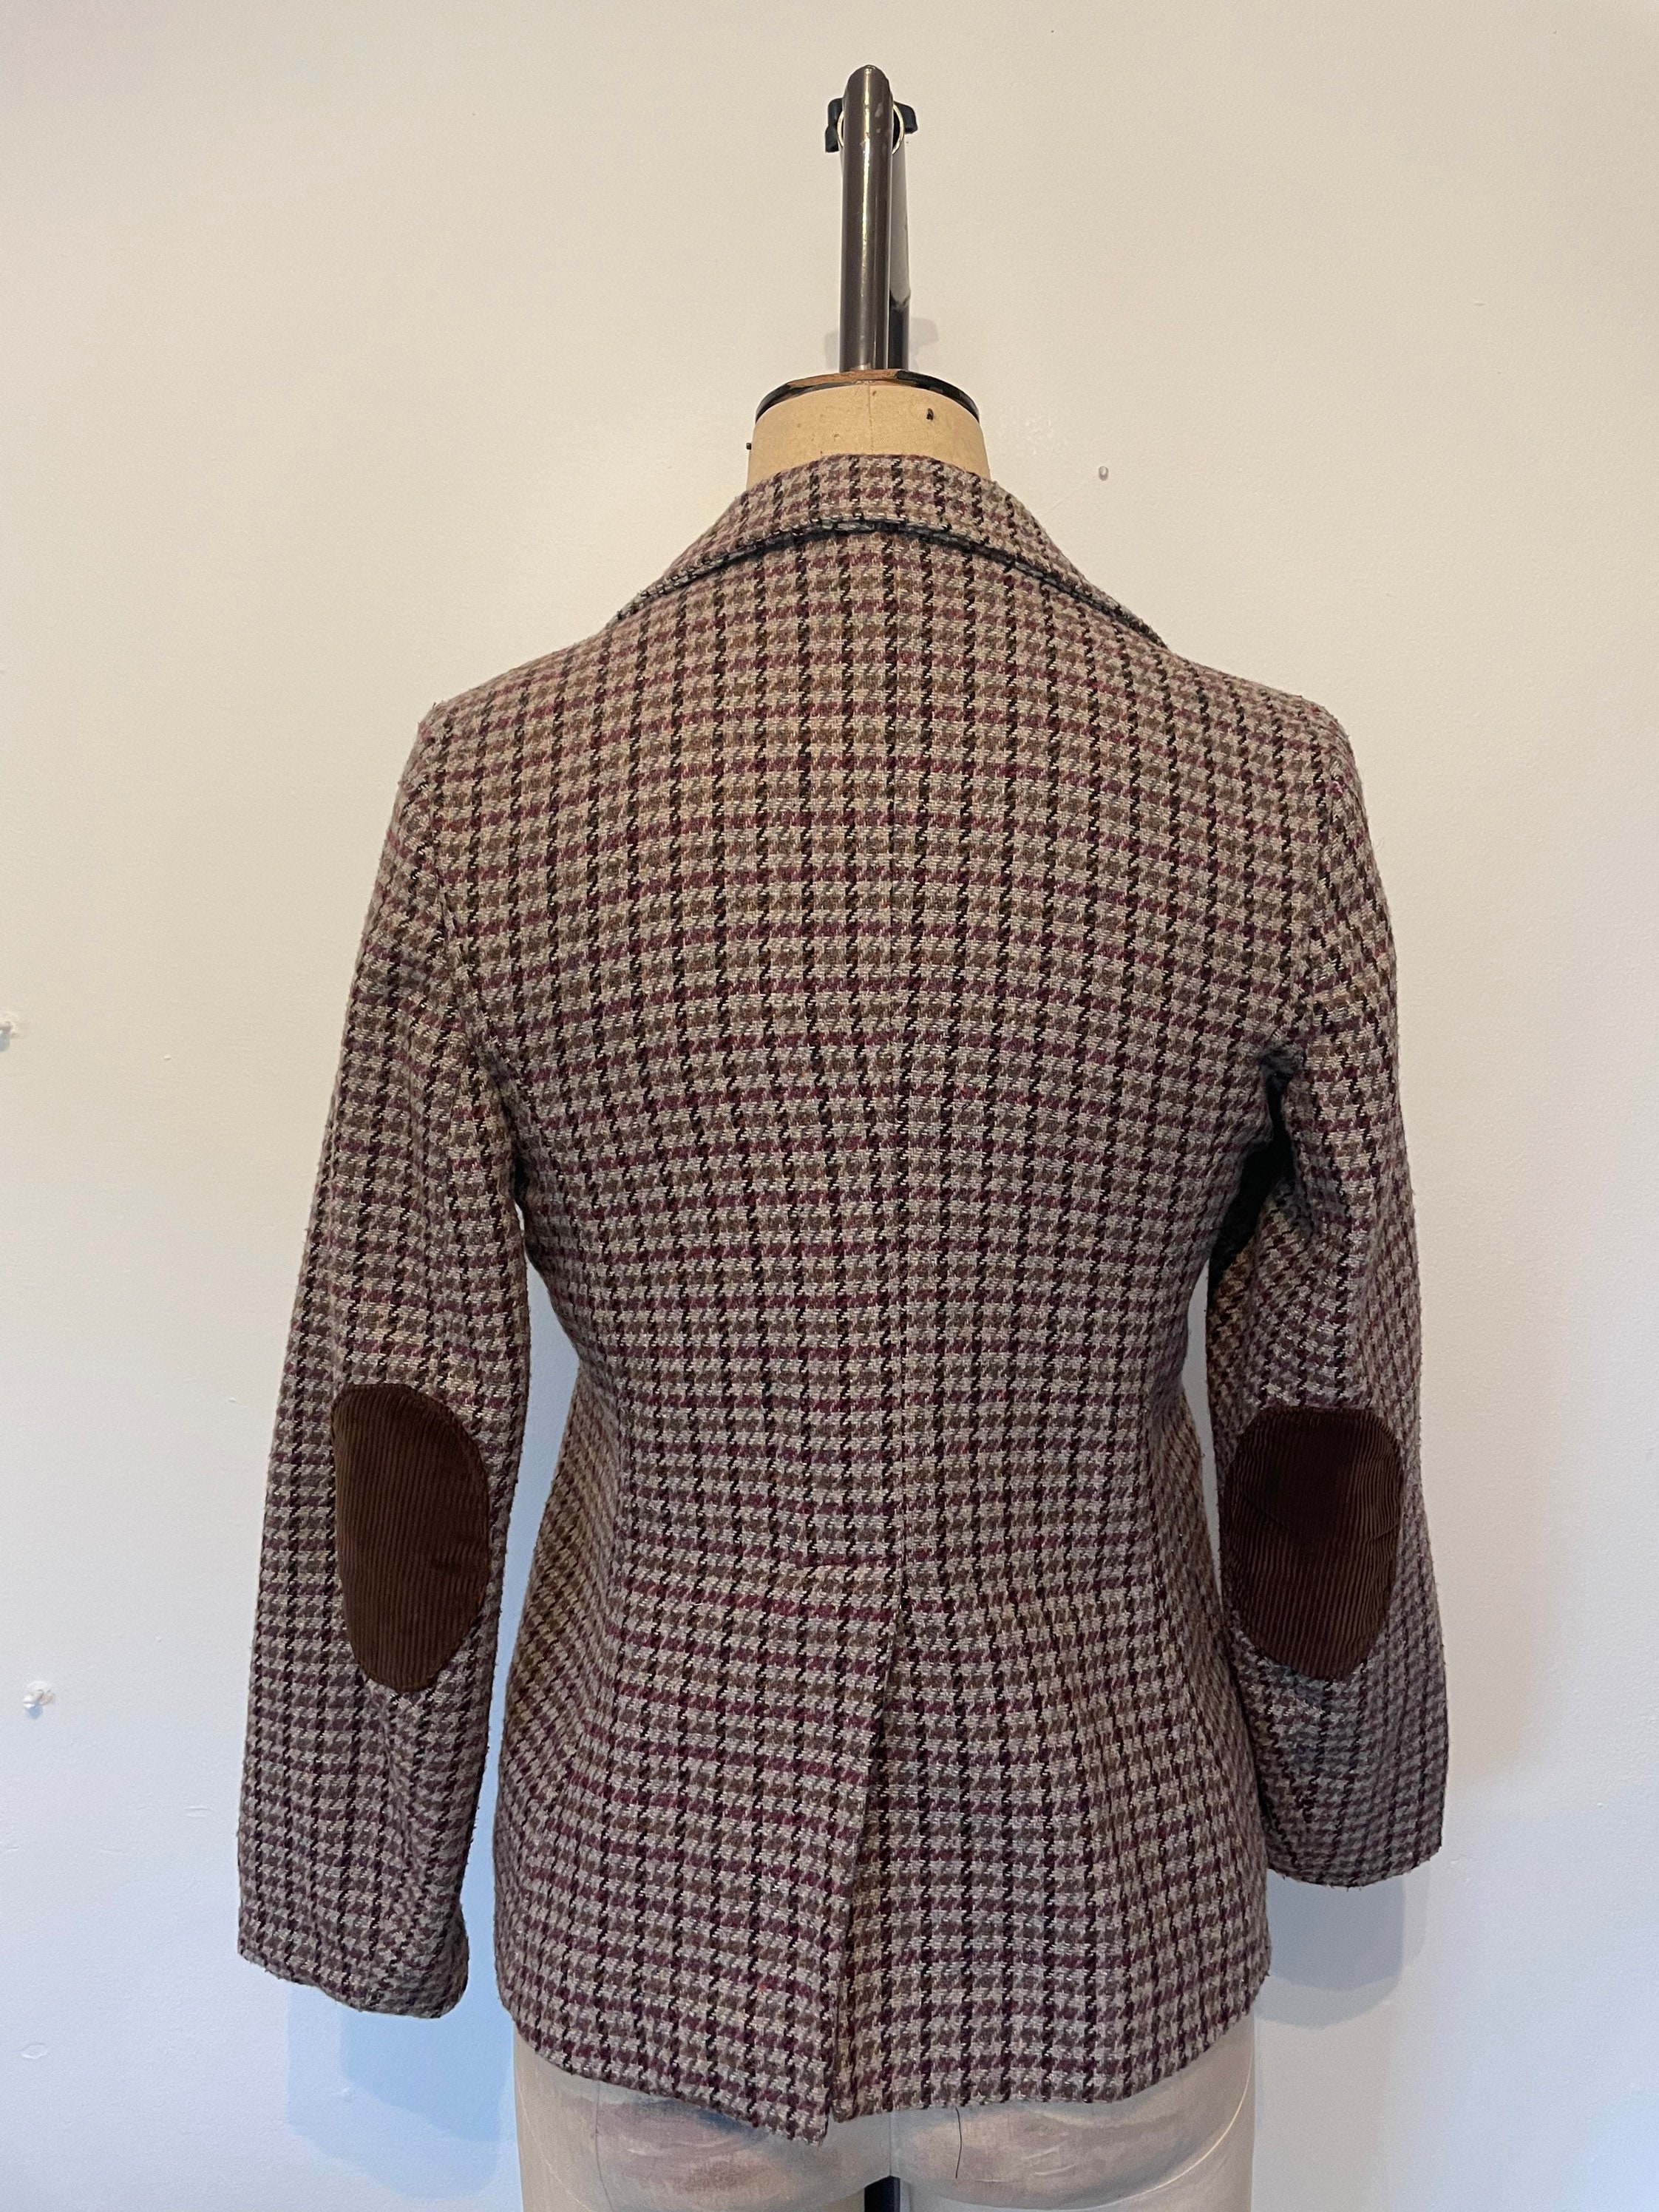 Vintage Houndstooth Jacket With Elbow Patches 